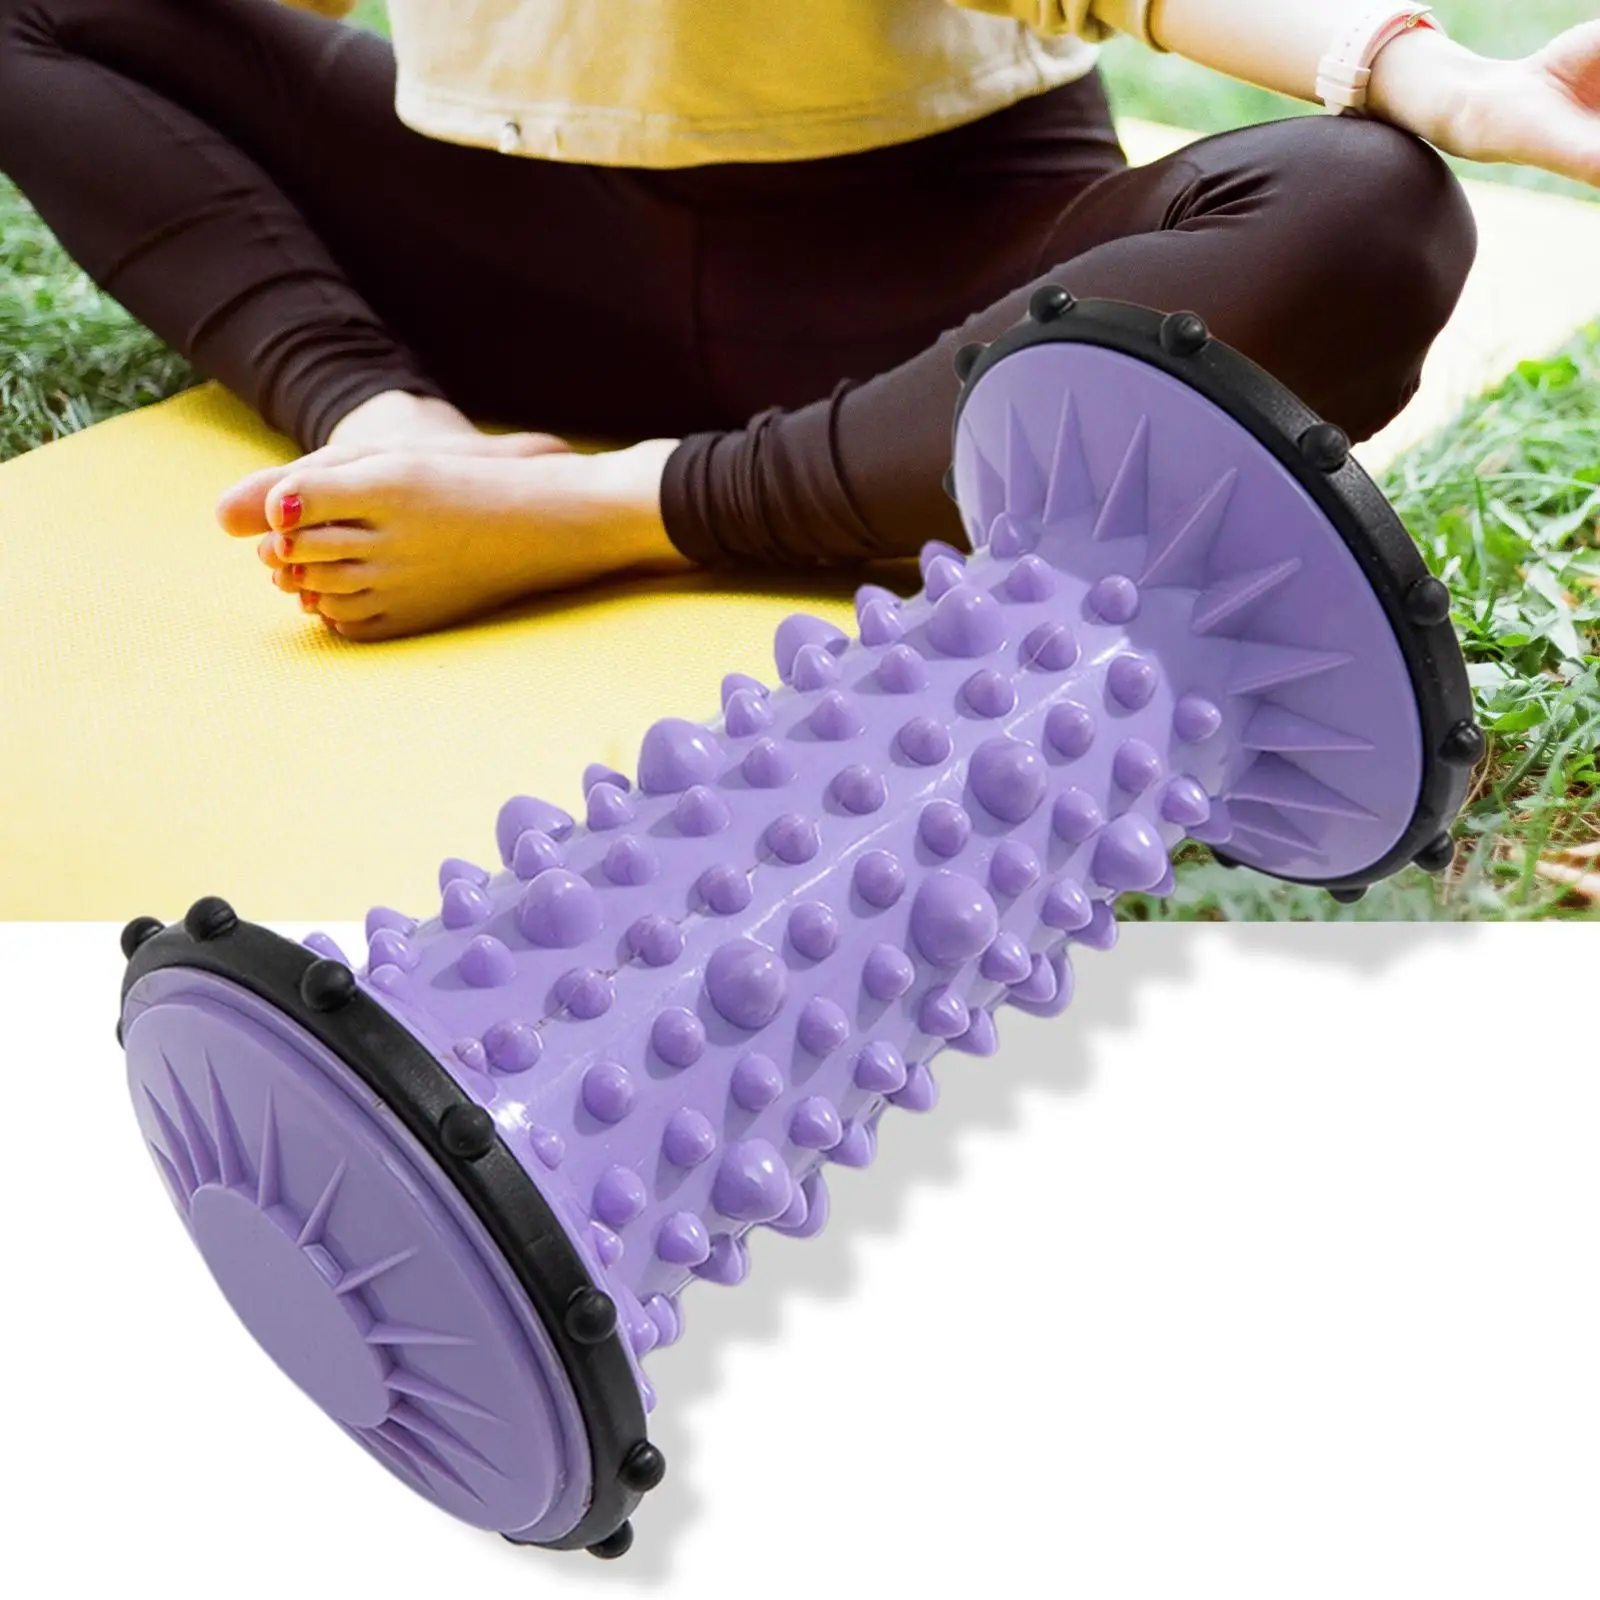 Foot Roller Foot Massage Roller Comfortable Silicone Muscle Roller Durable